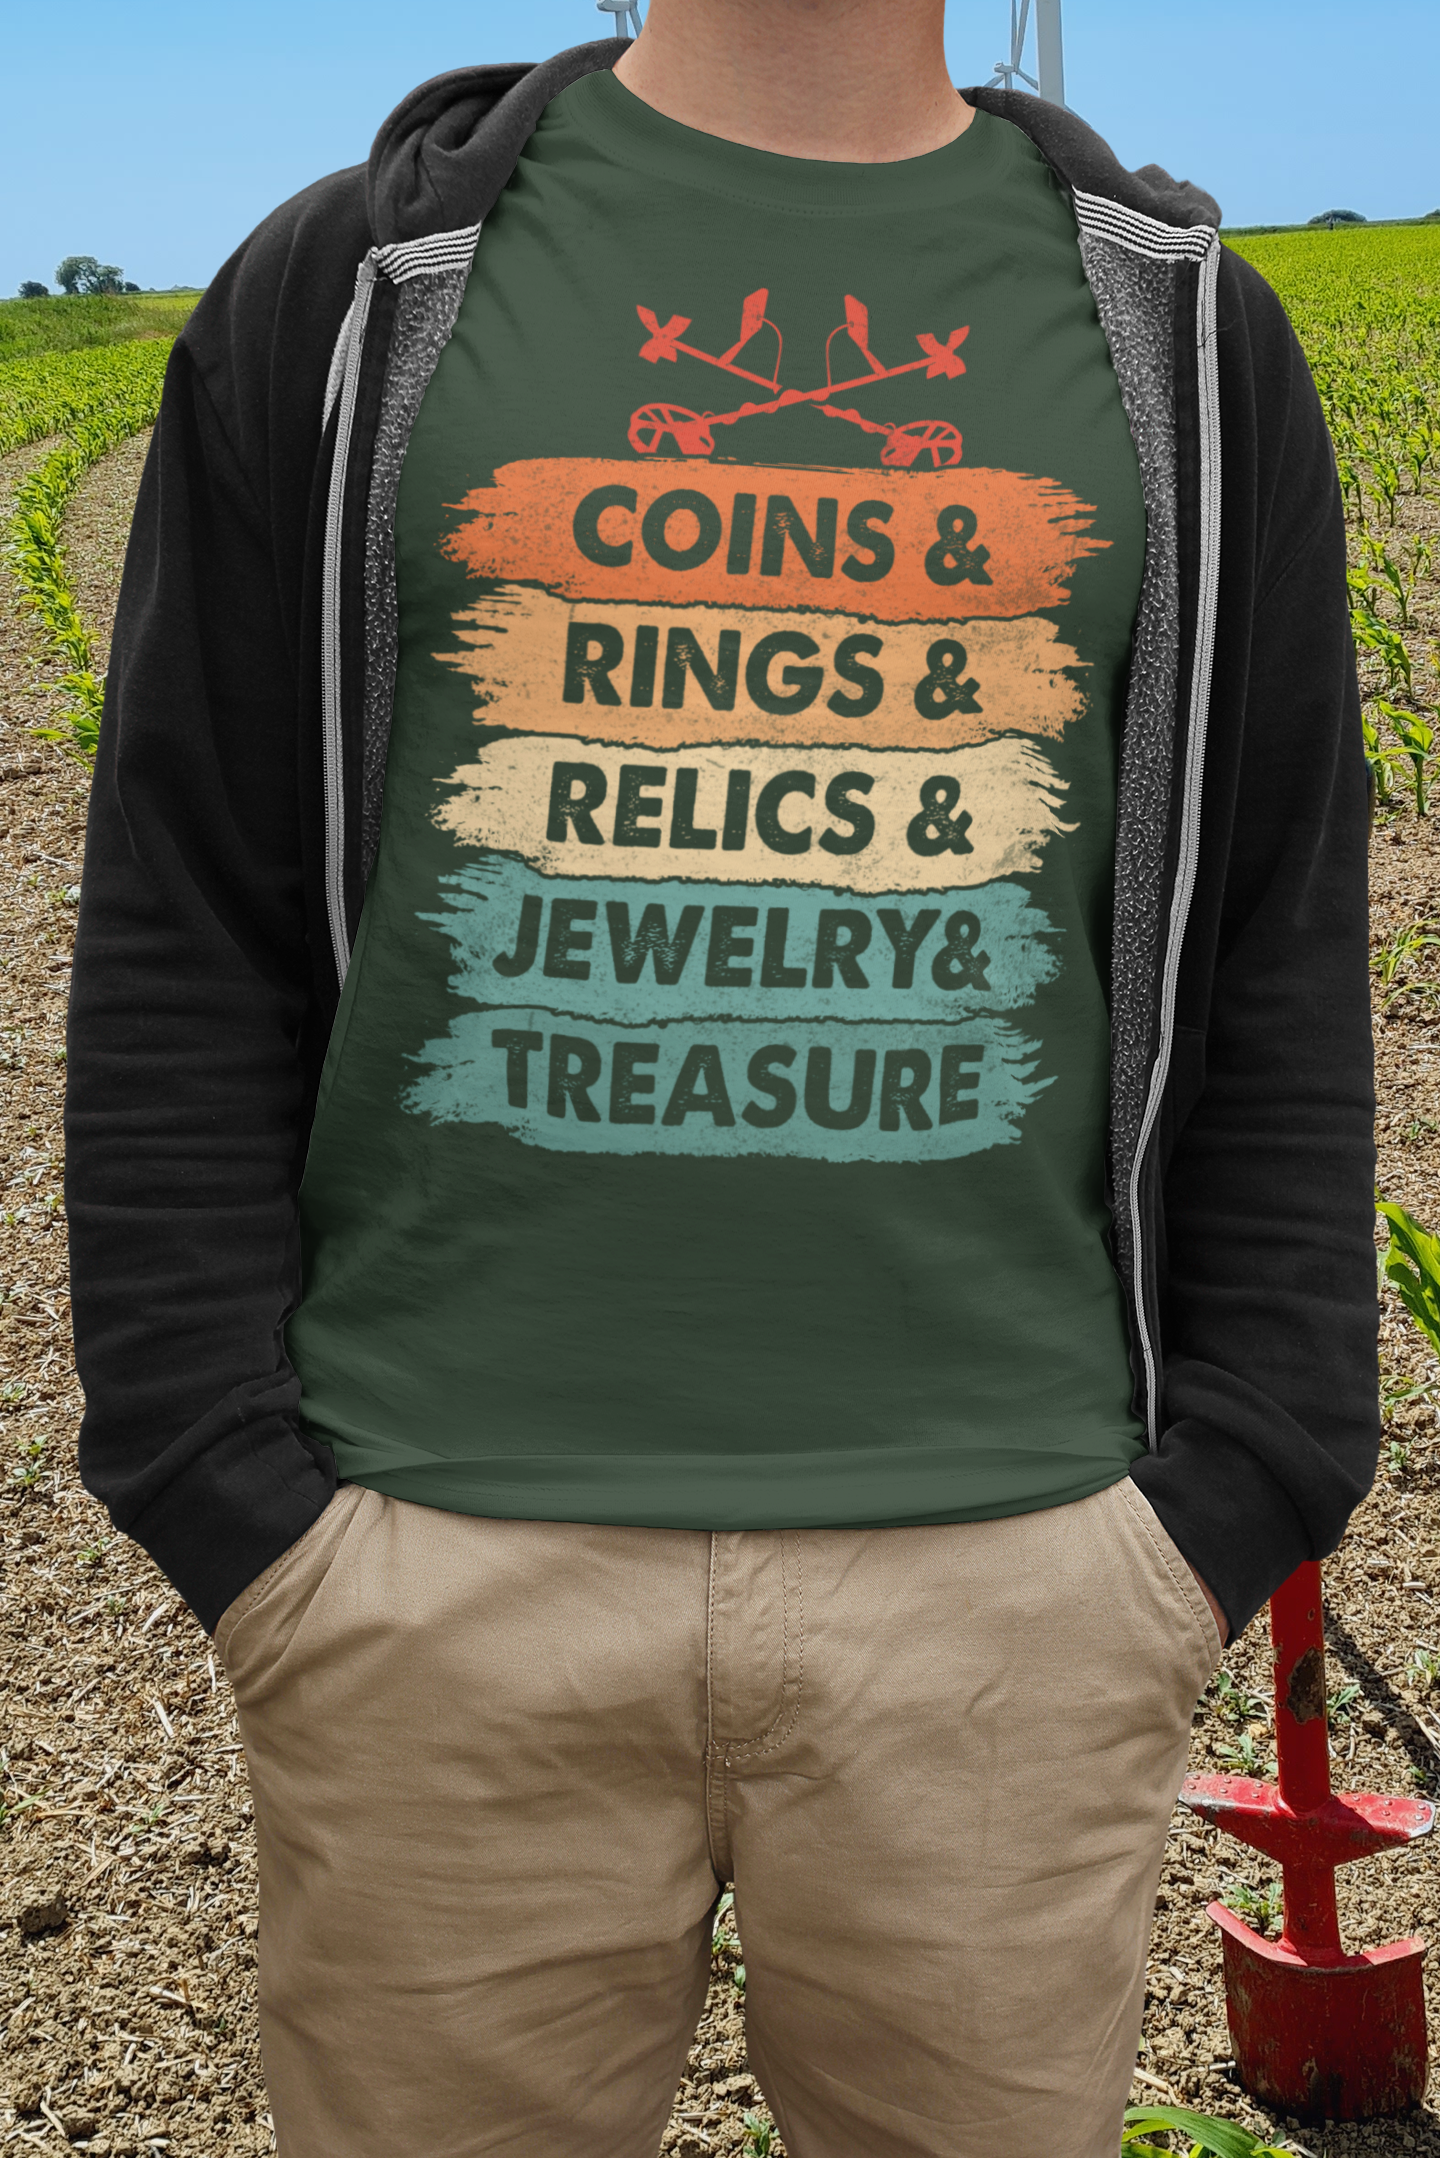 Coin & Rings & Relics & Jewelry & Treasure T-shirt